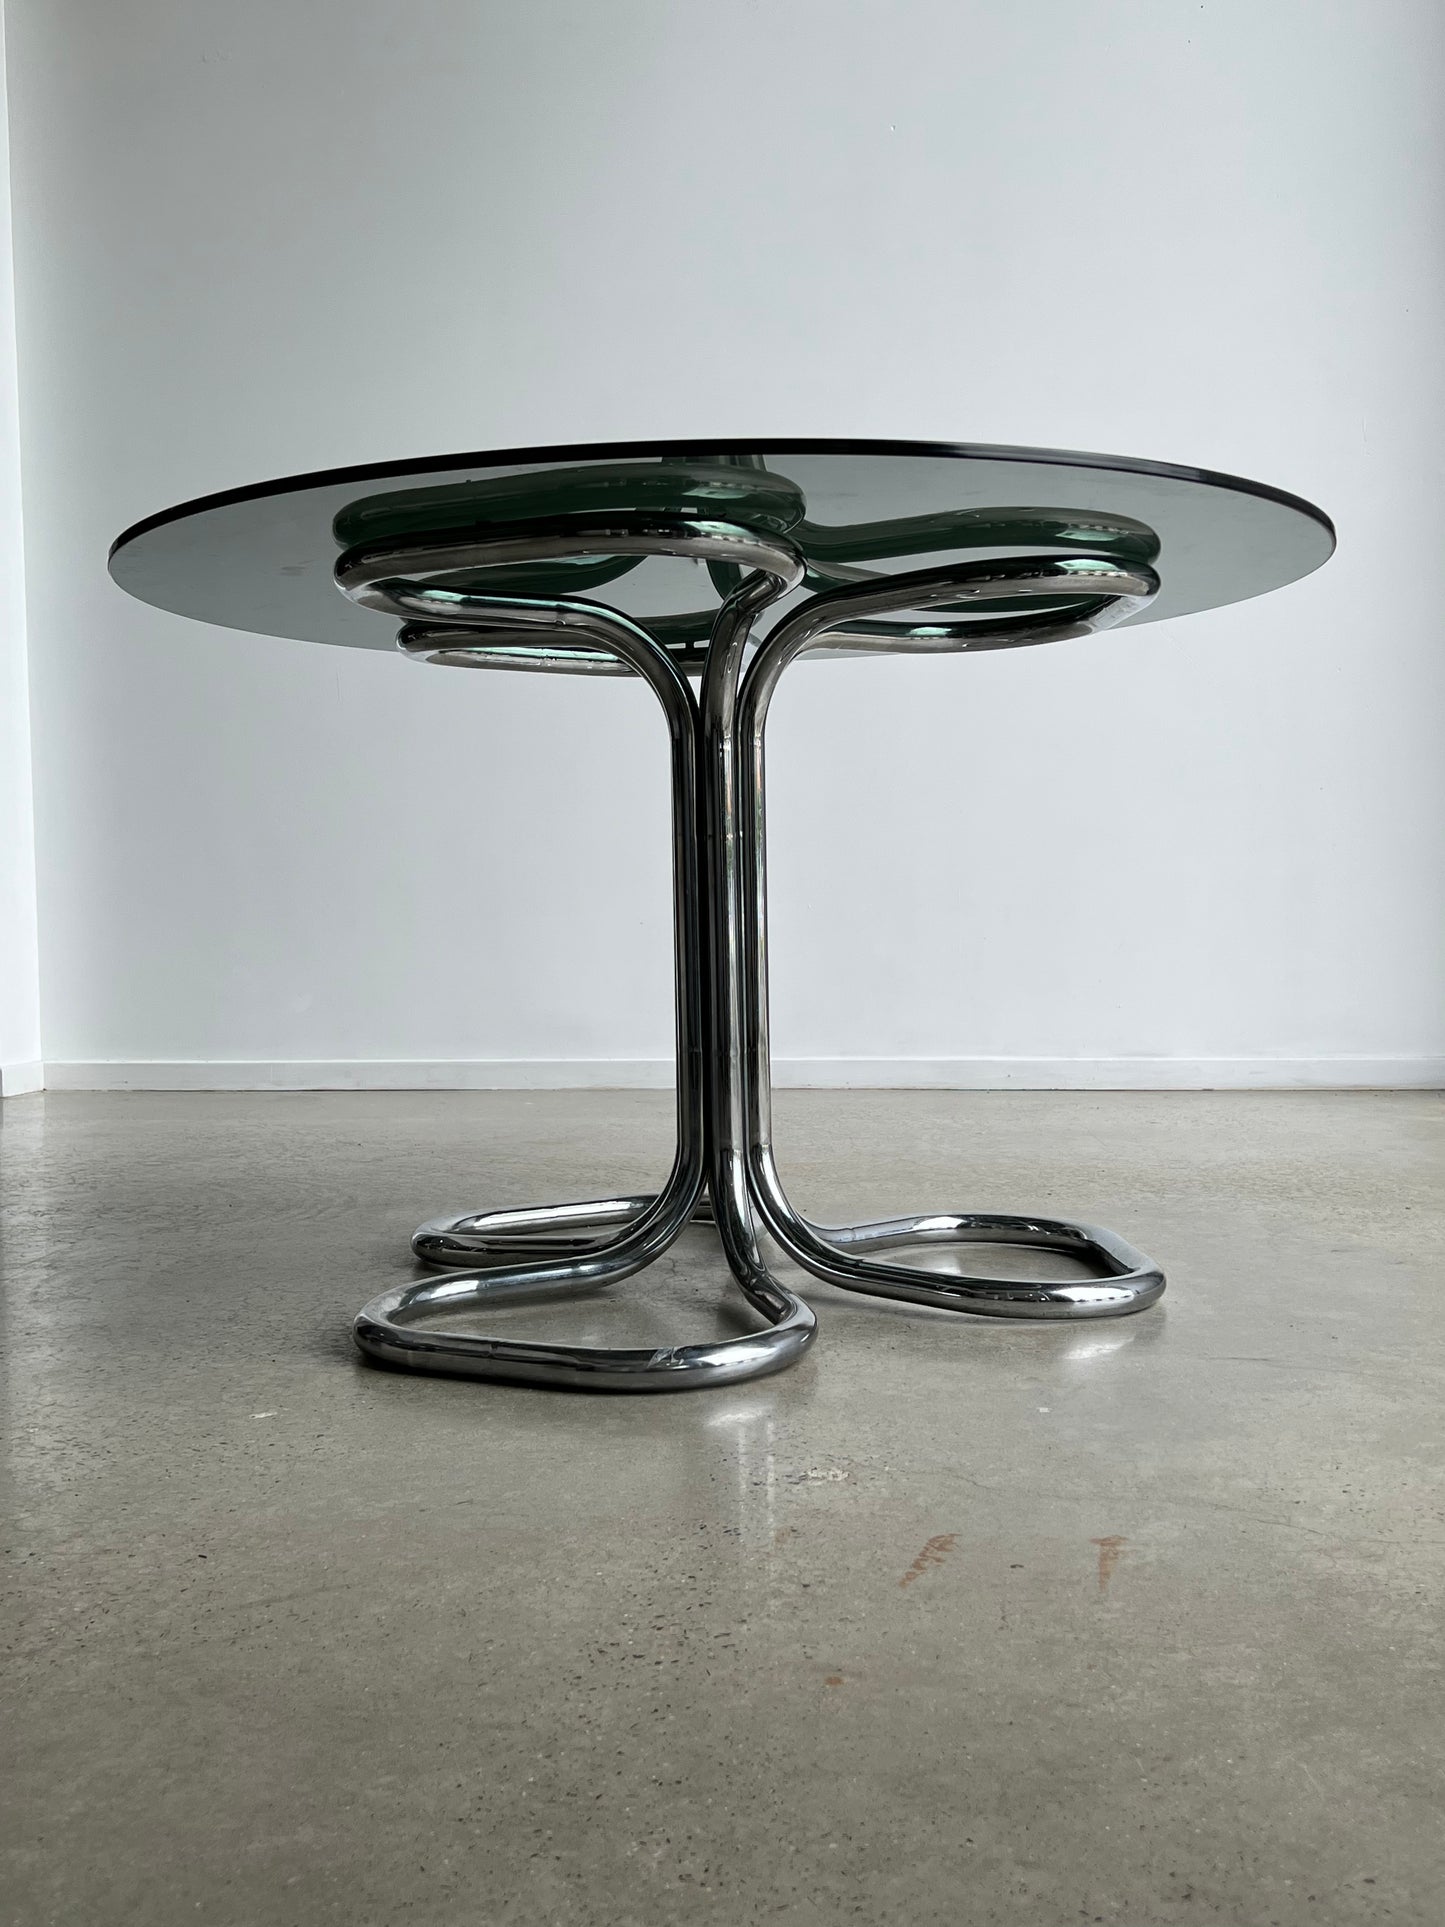 Giotto Stoppino round Glass and Chrome Round Dining Table,1970s